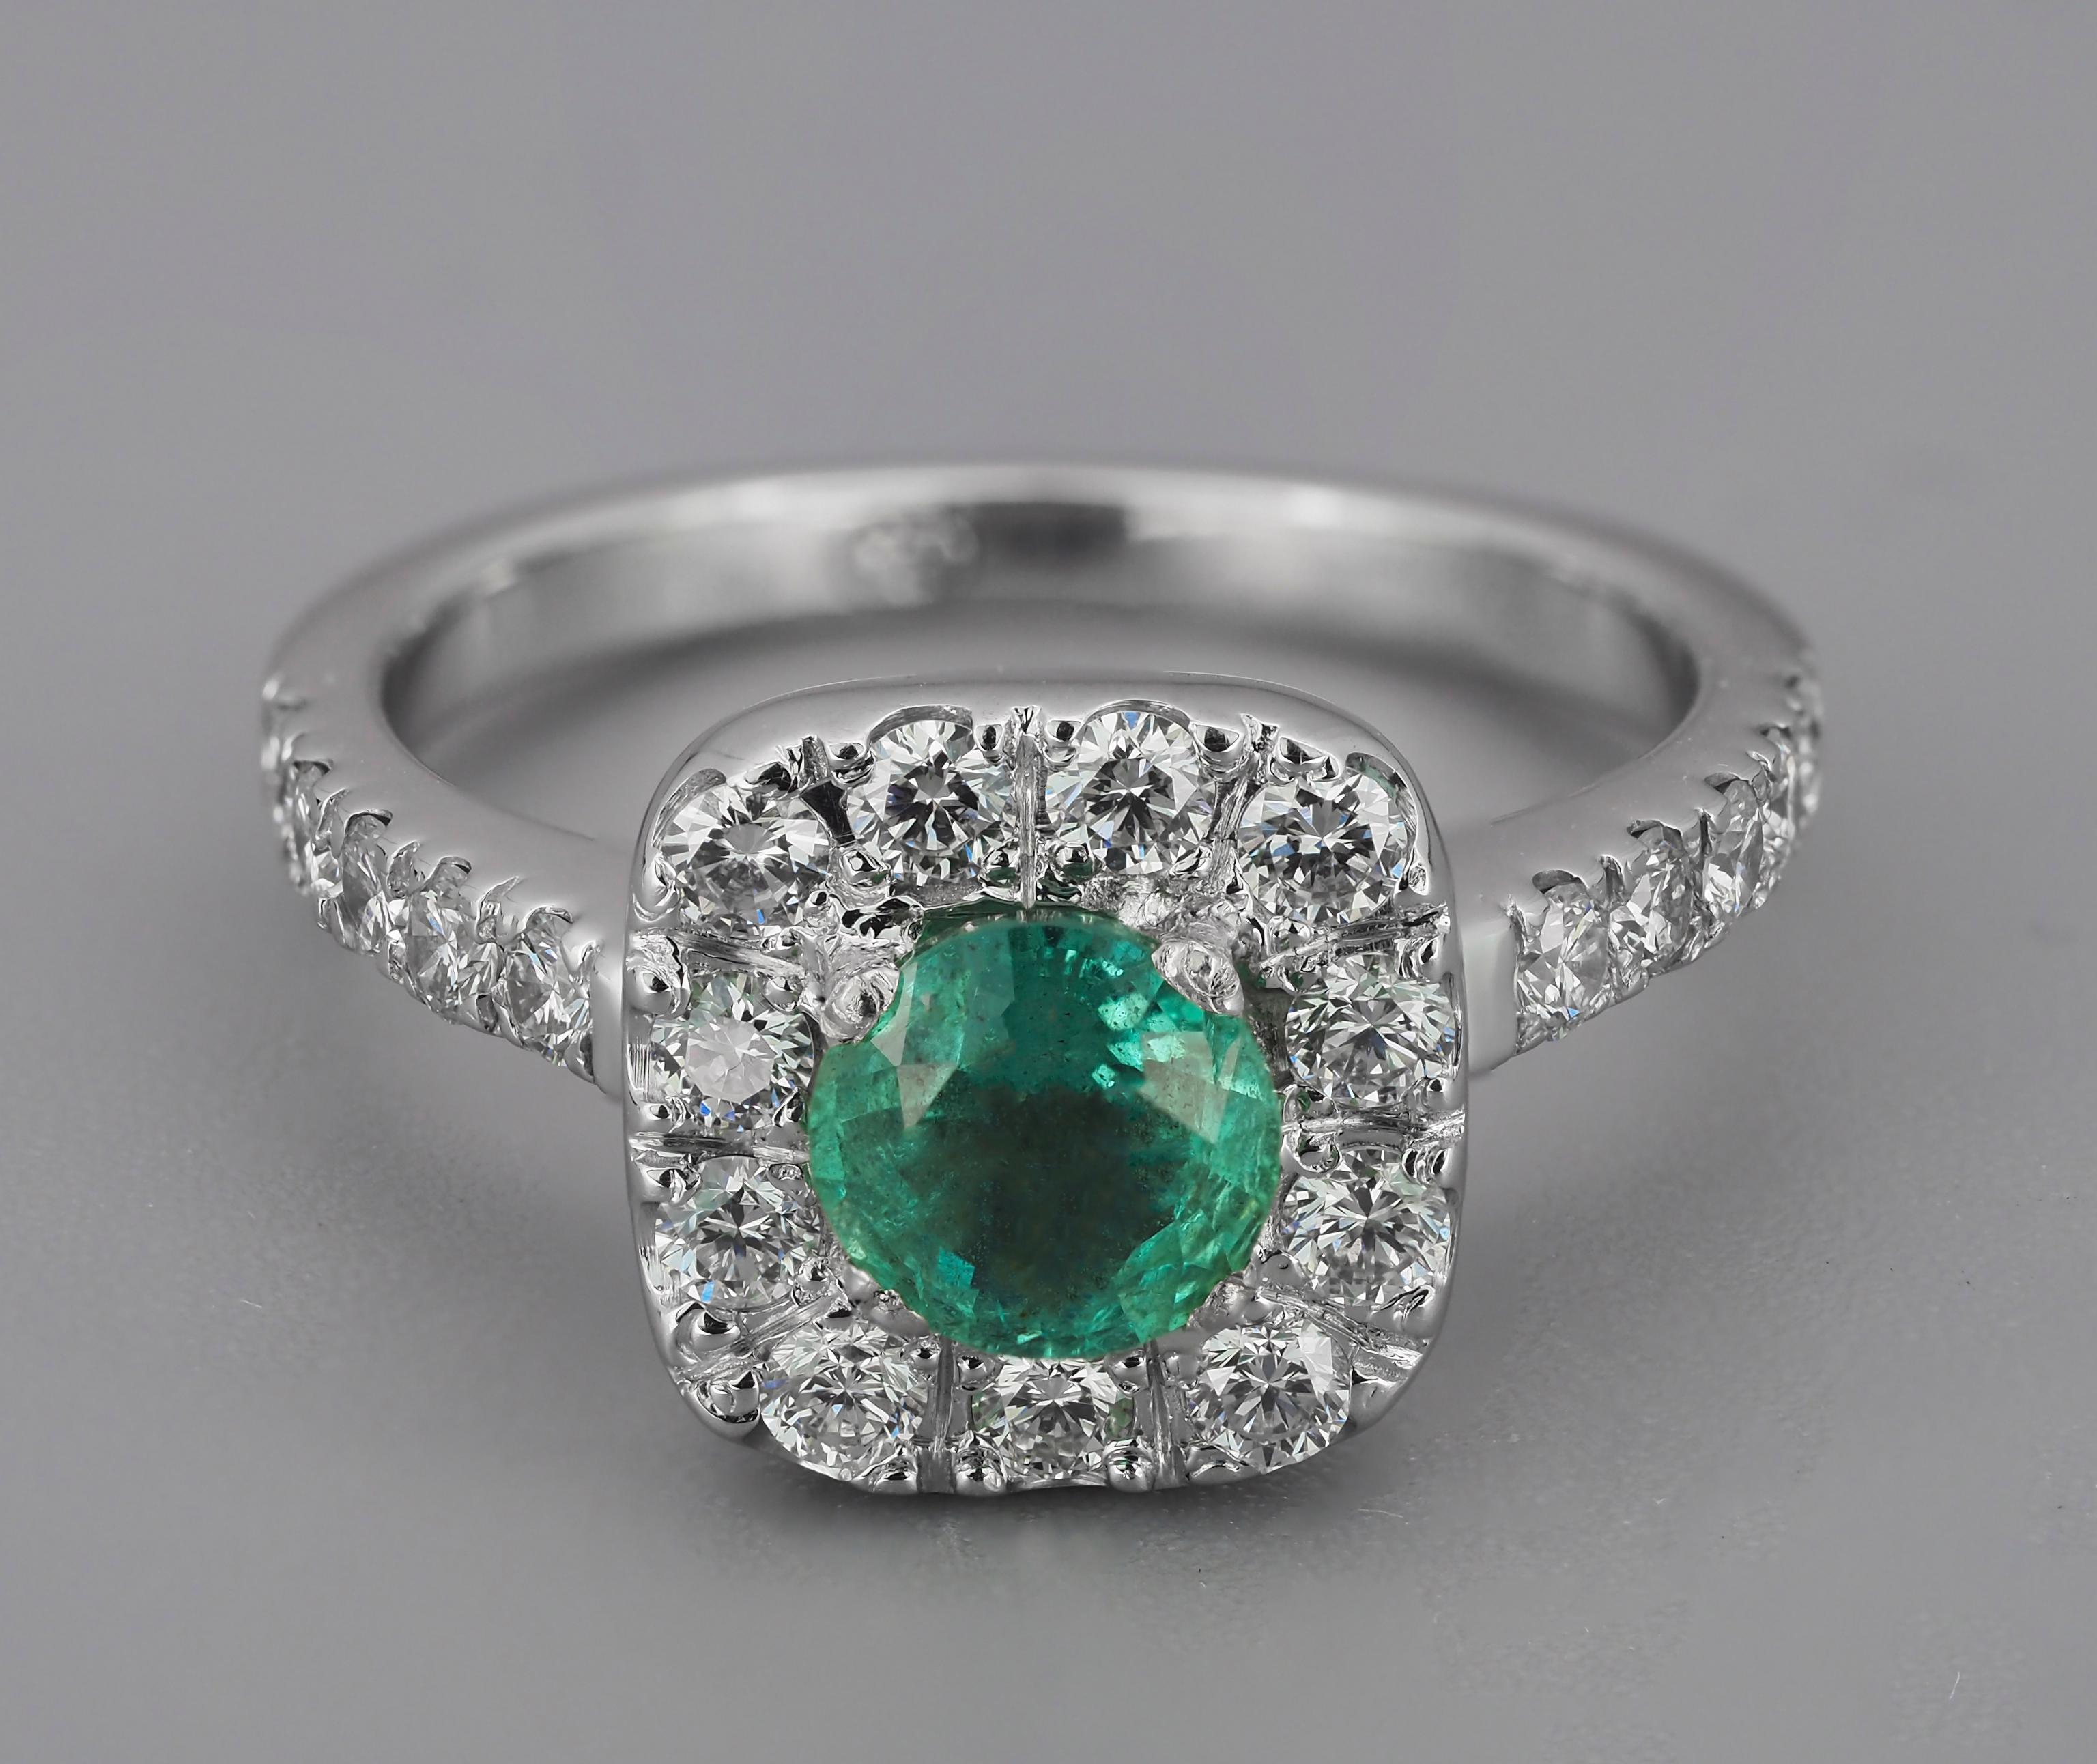 Diamond Halo emerald 14k gold ring. 
Emerald and diamonds gold ring. Vintage Emerald Ring. Emerald engagement ring. Statement gold ring.

Metal: 14k gold
Weight - 3 gr - depends from size.

Central stone: Emerald
Cut: Round
Weight: aprx 0.5